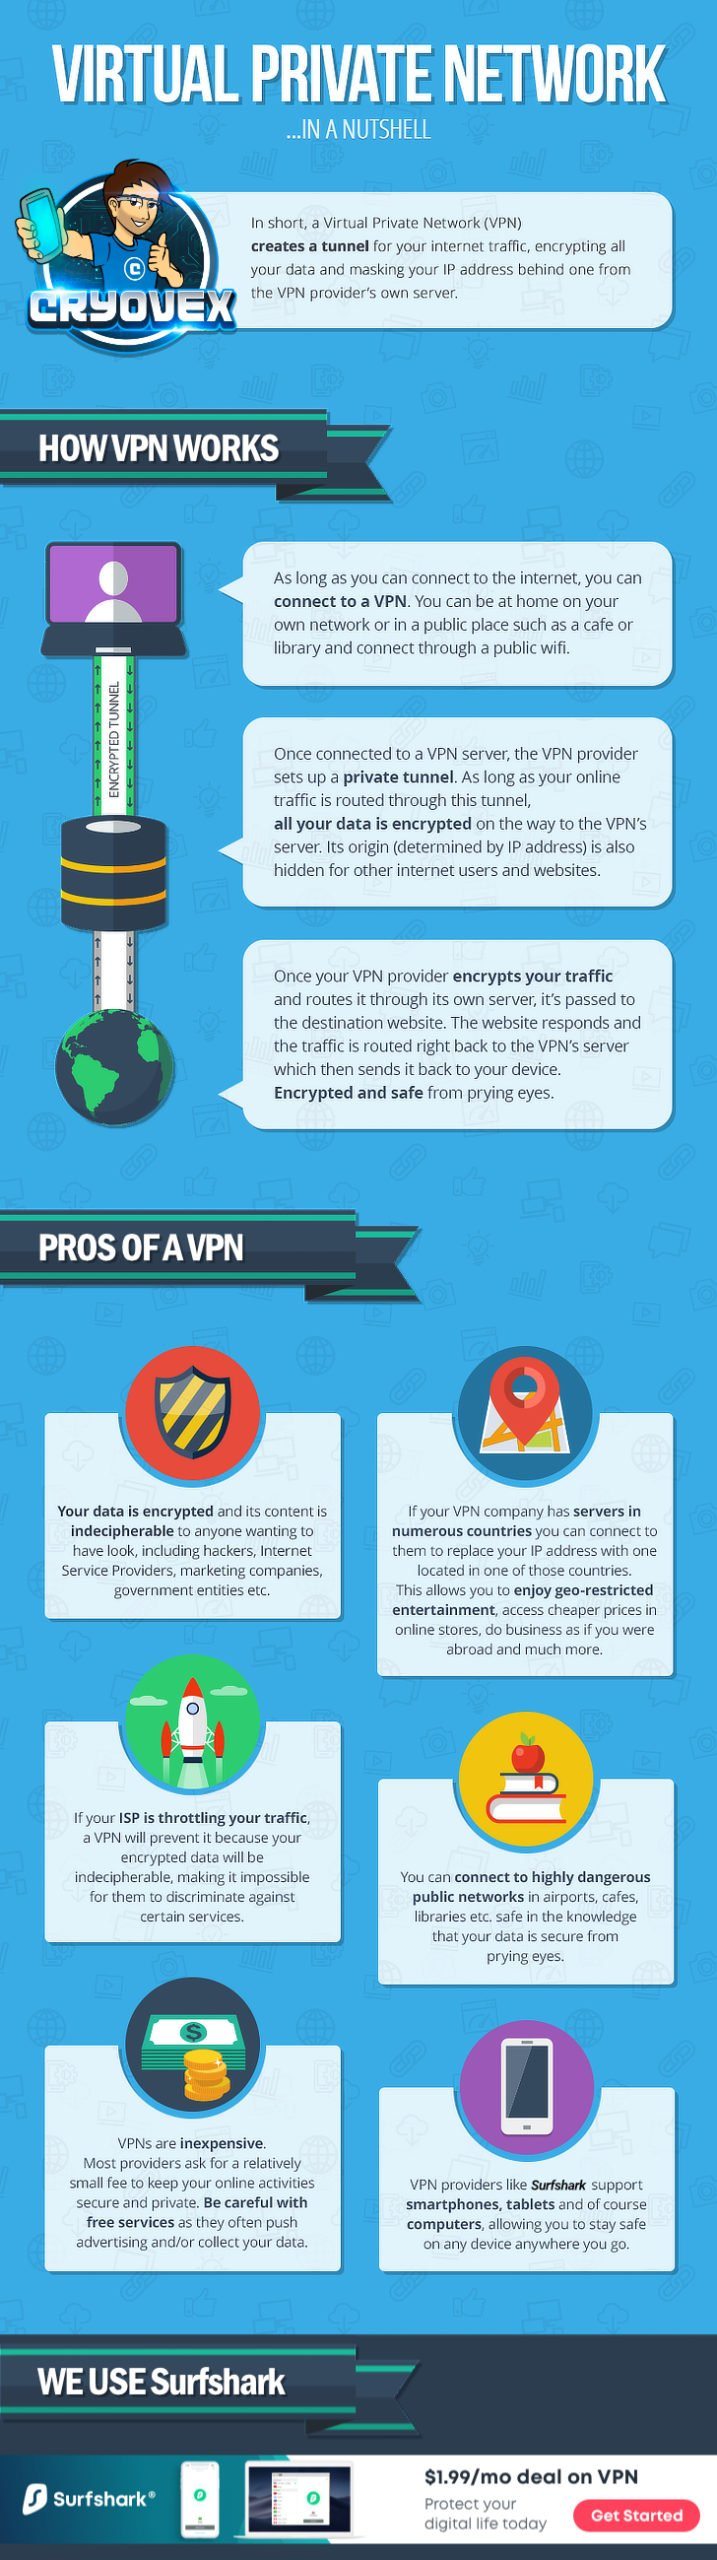 VPN Meaning - Best VPN 2020 Why you should use a VPN right now!